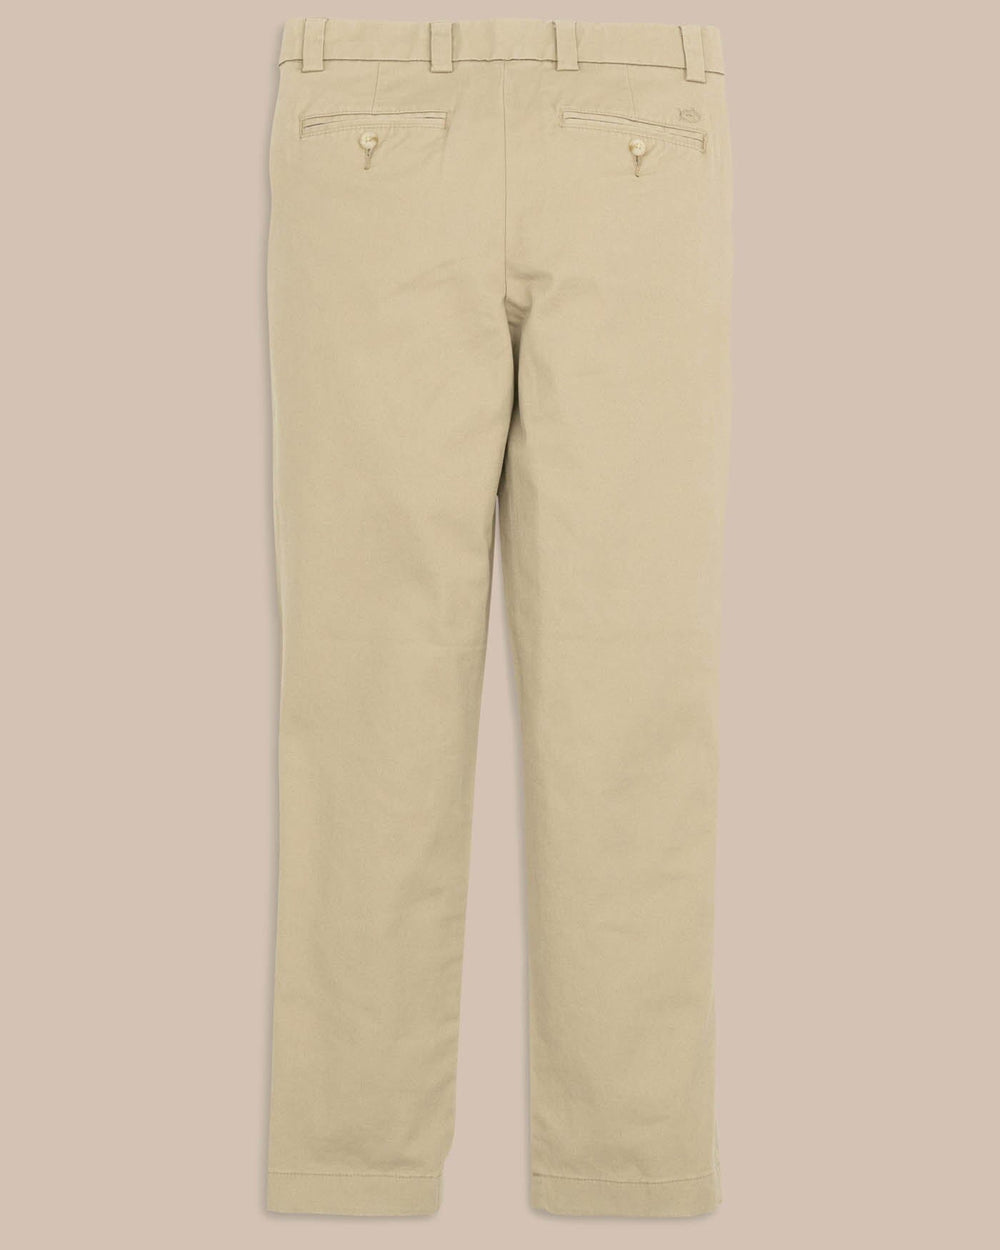 The back view of the Boys Channel Marker Pant by Southern Tide - Sandstone Khaki